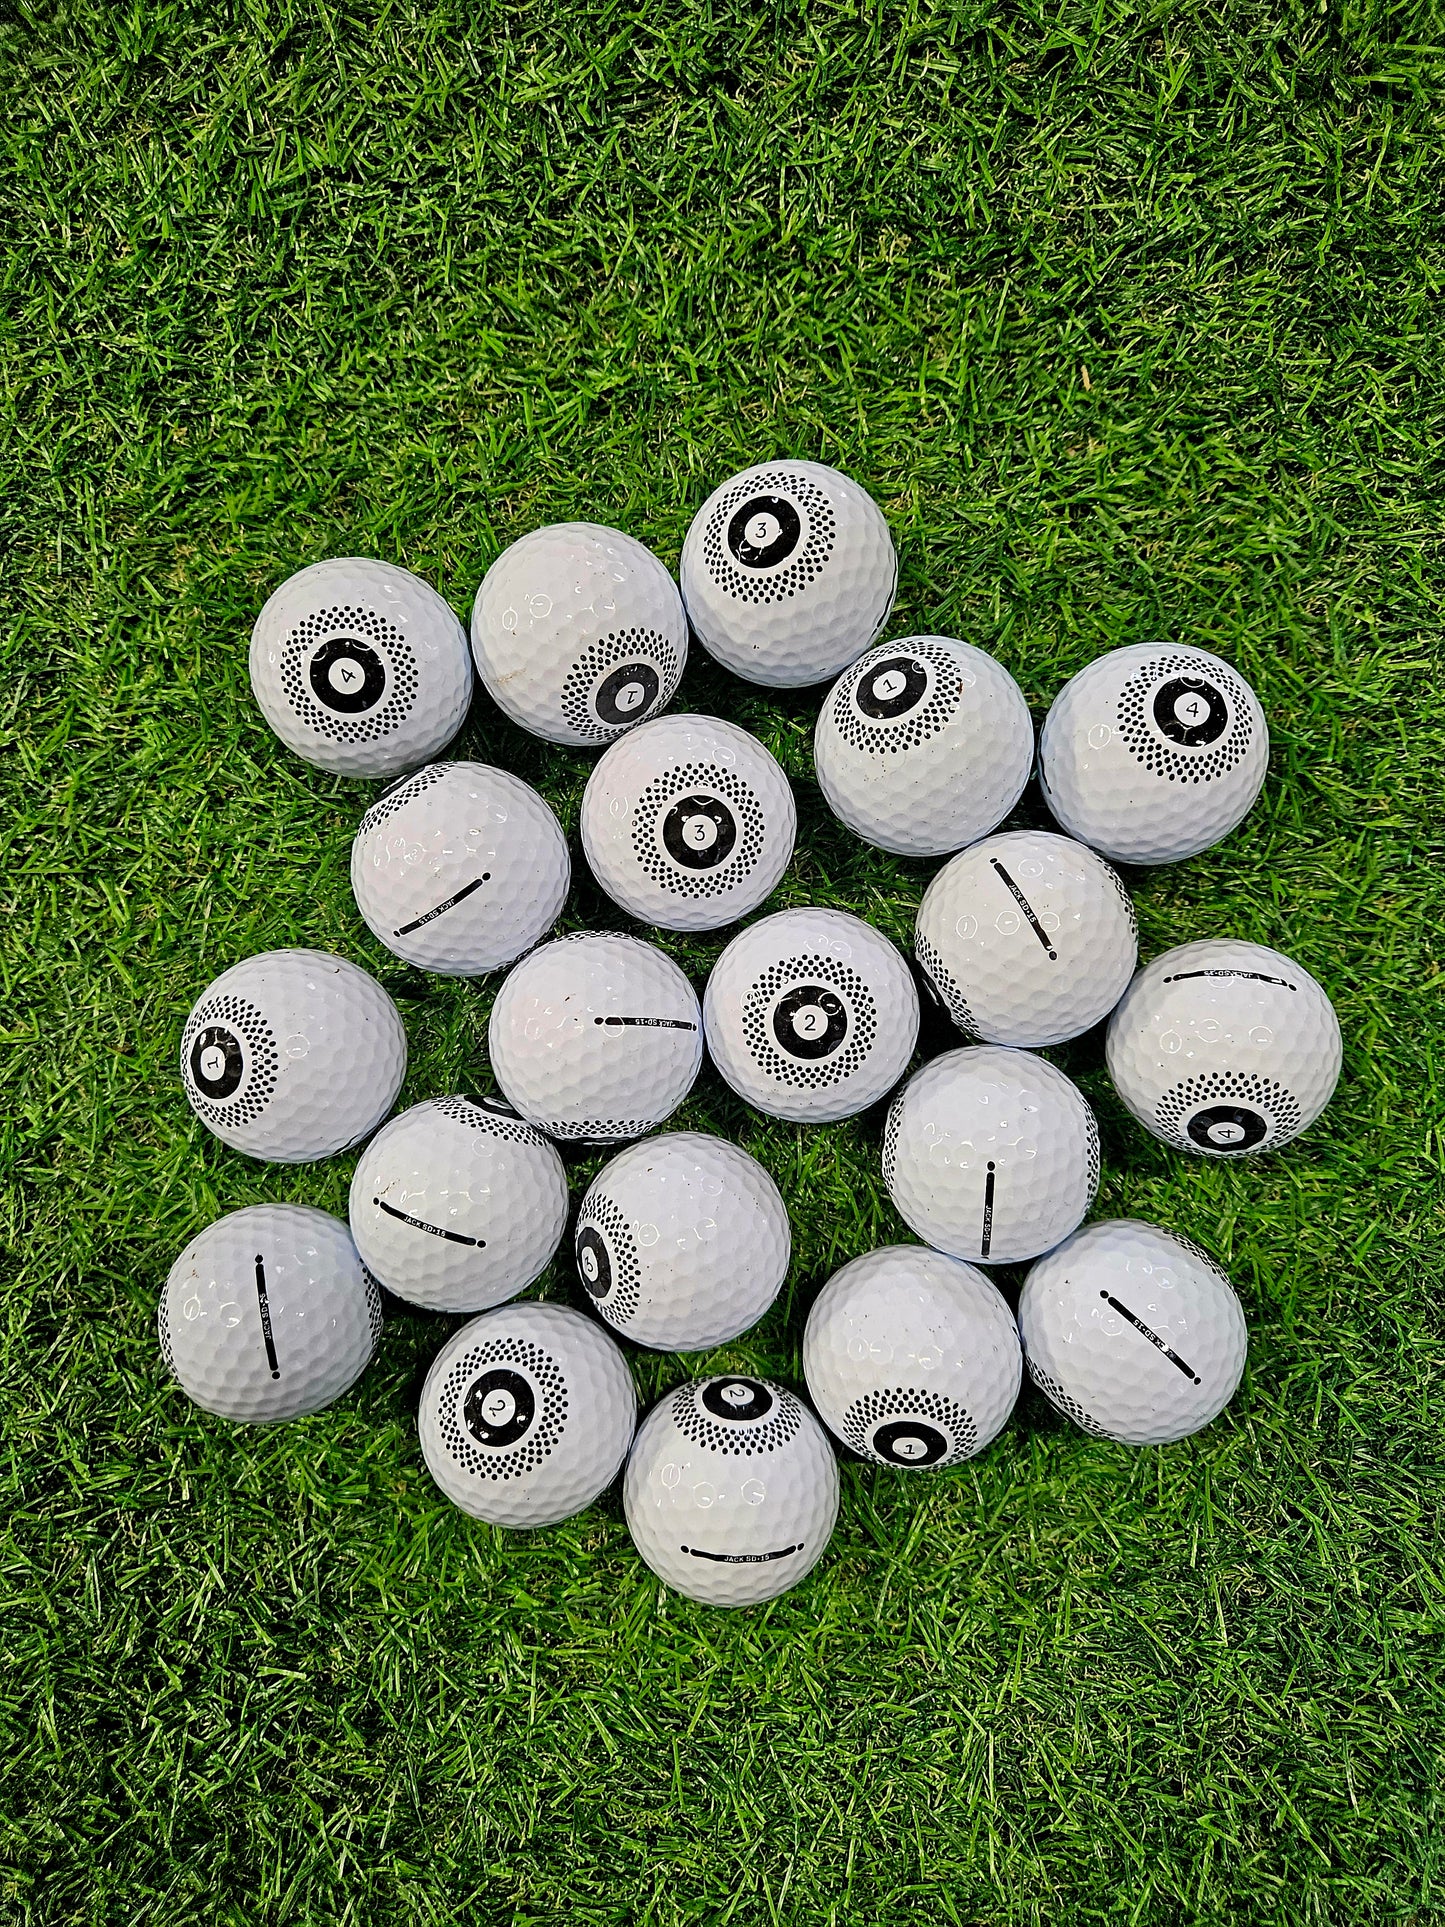 The Jack - Pack of 10 golf balls